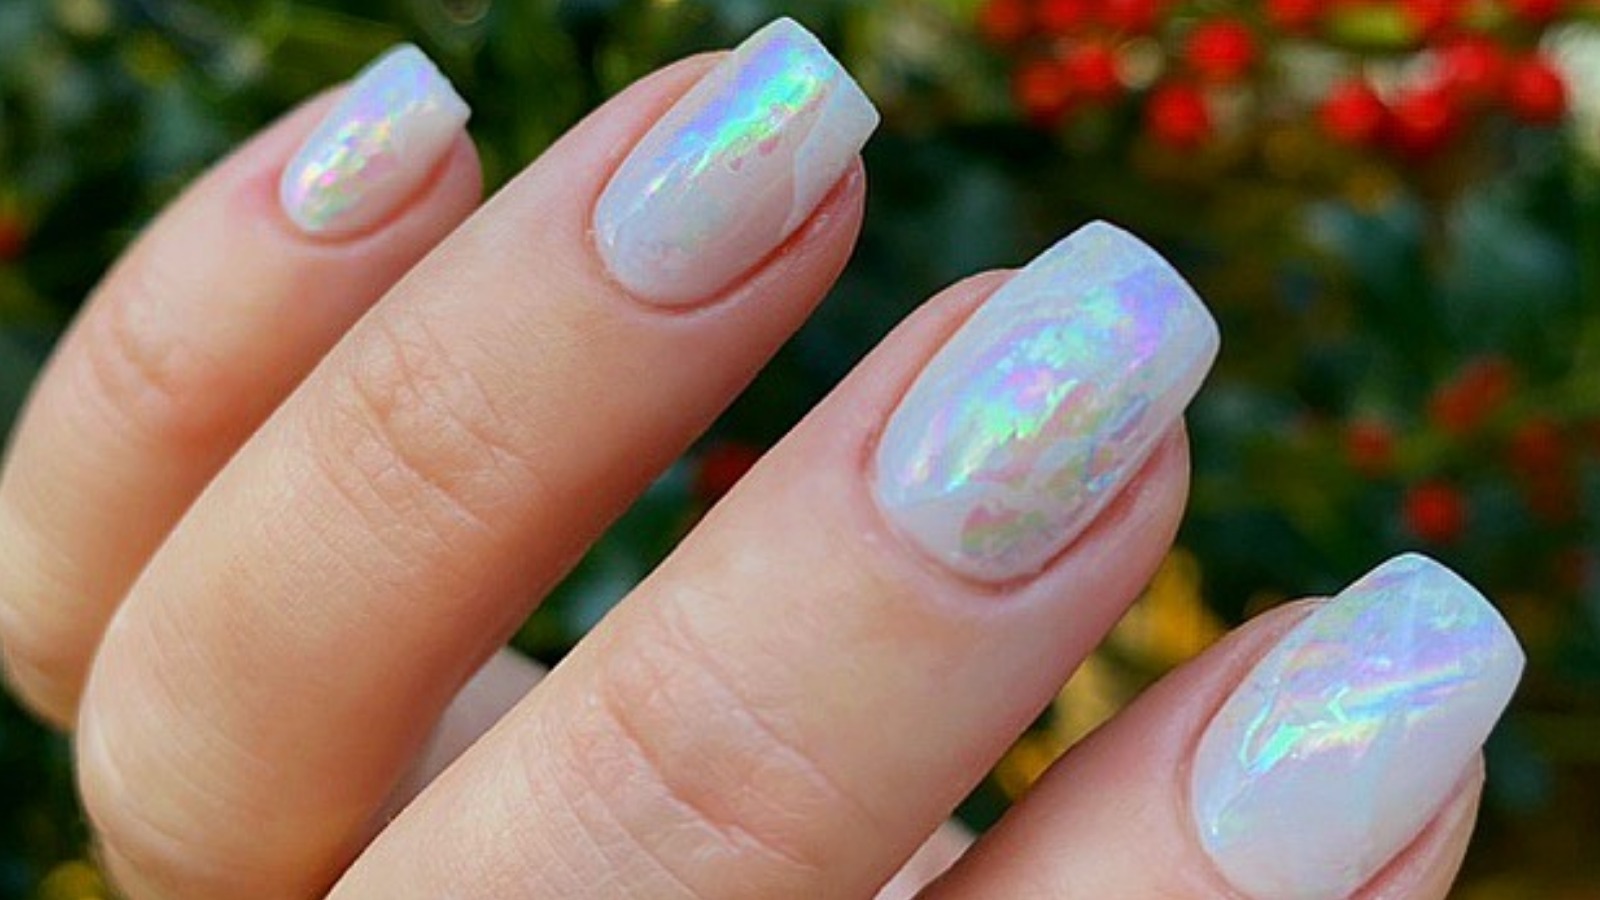 Mother Of Pearl Nails: How To Get The Iridescent Shimmery Manicure – The List